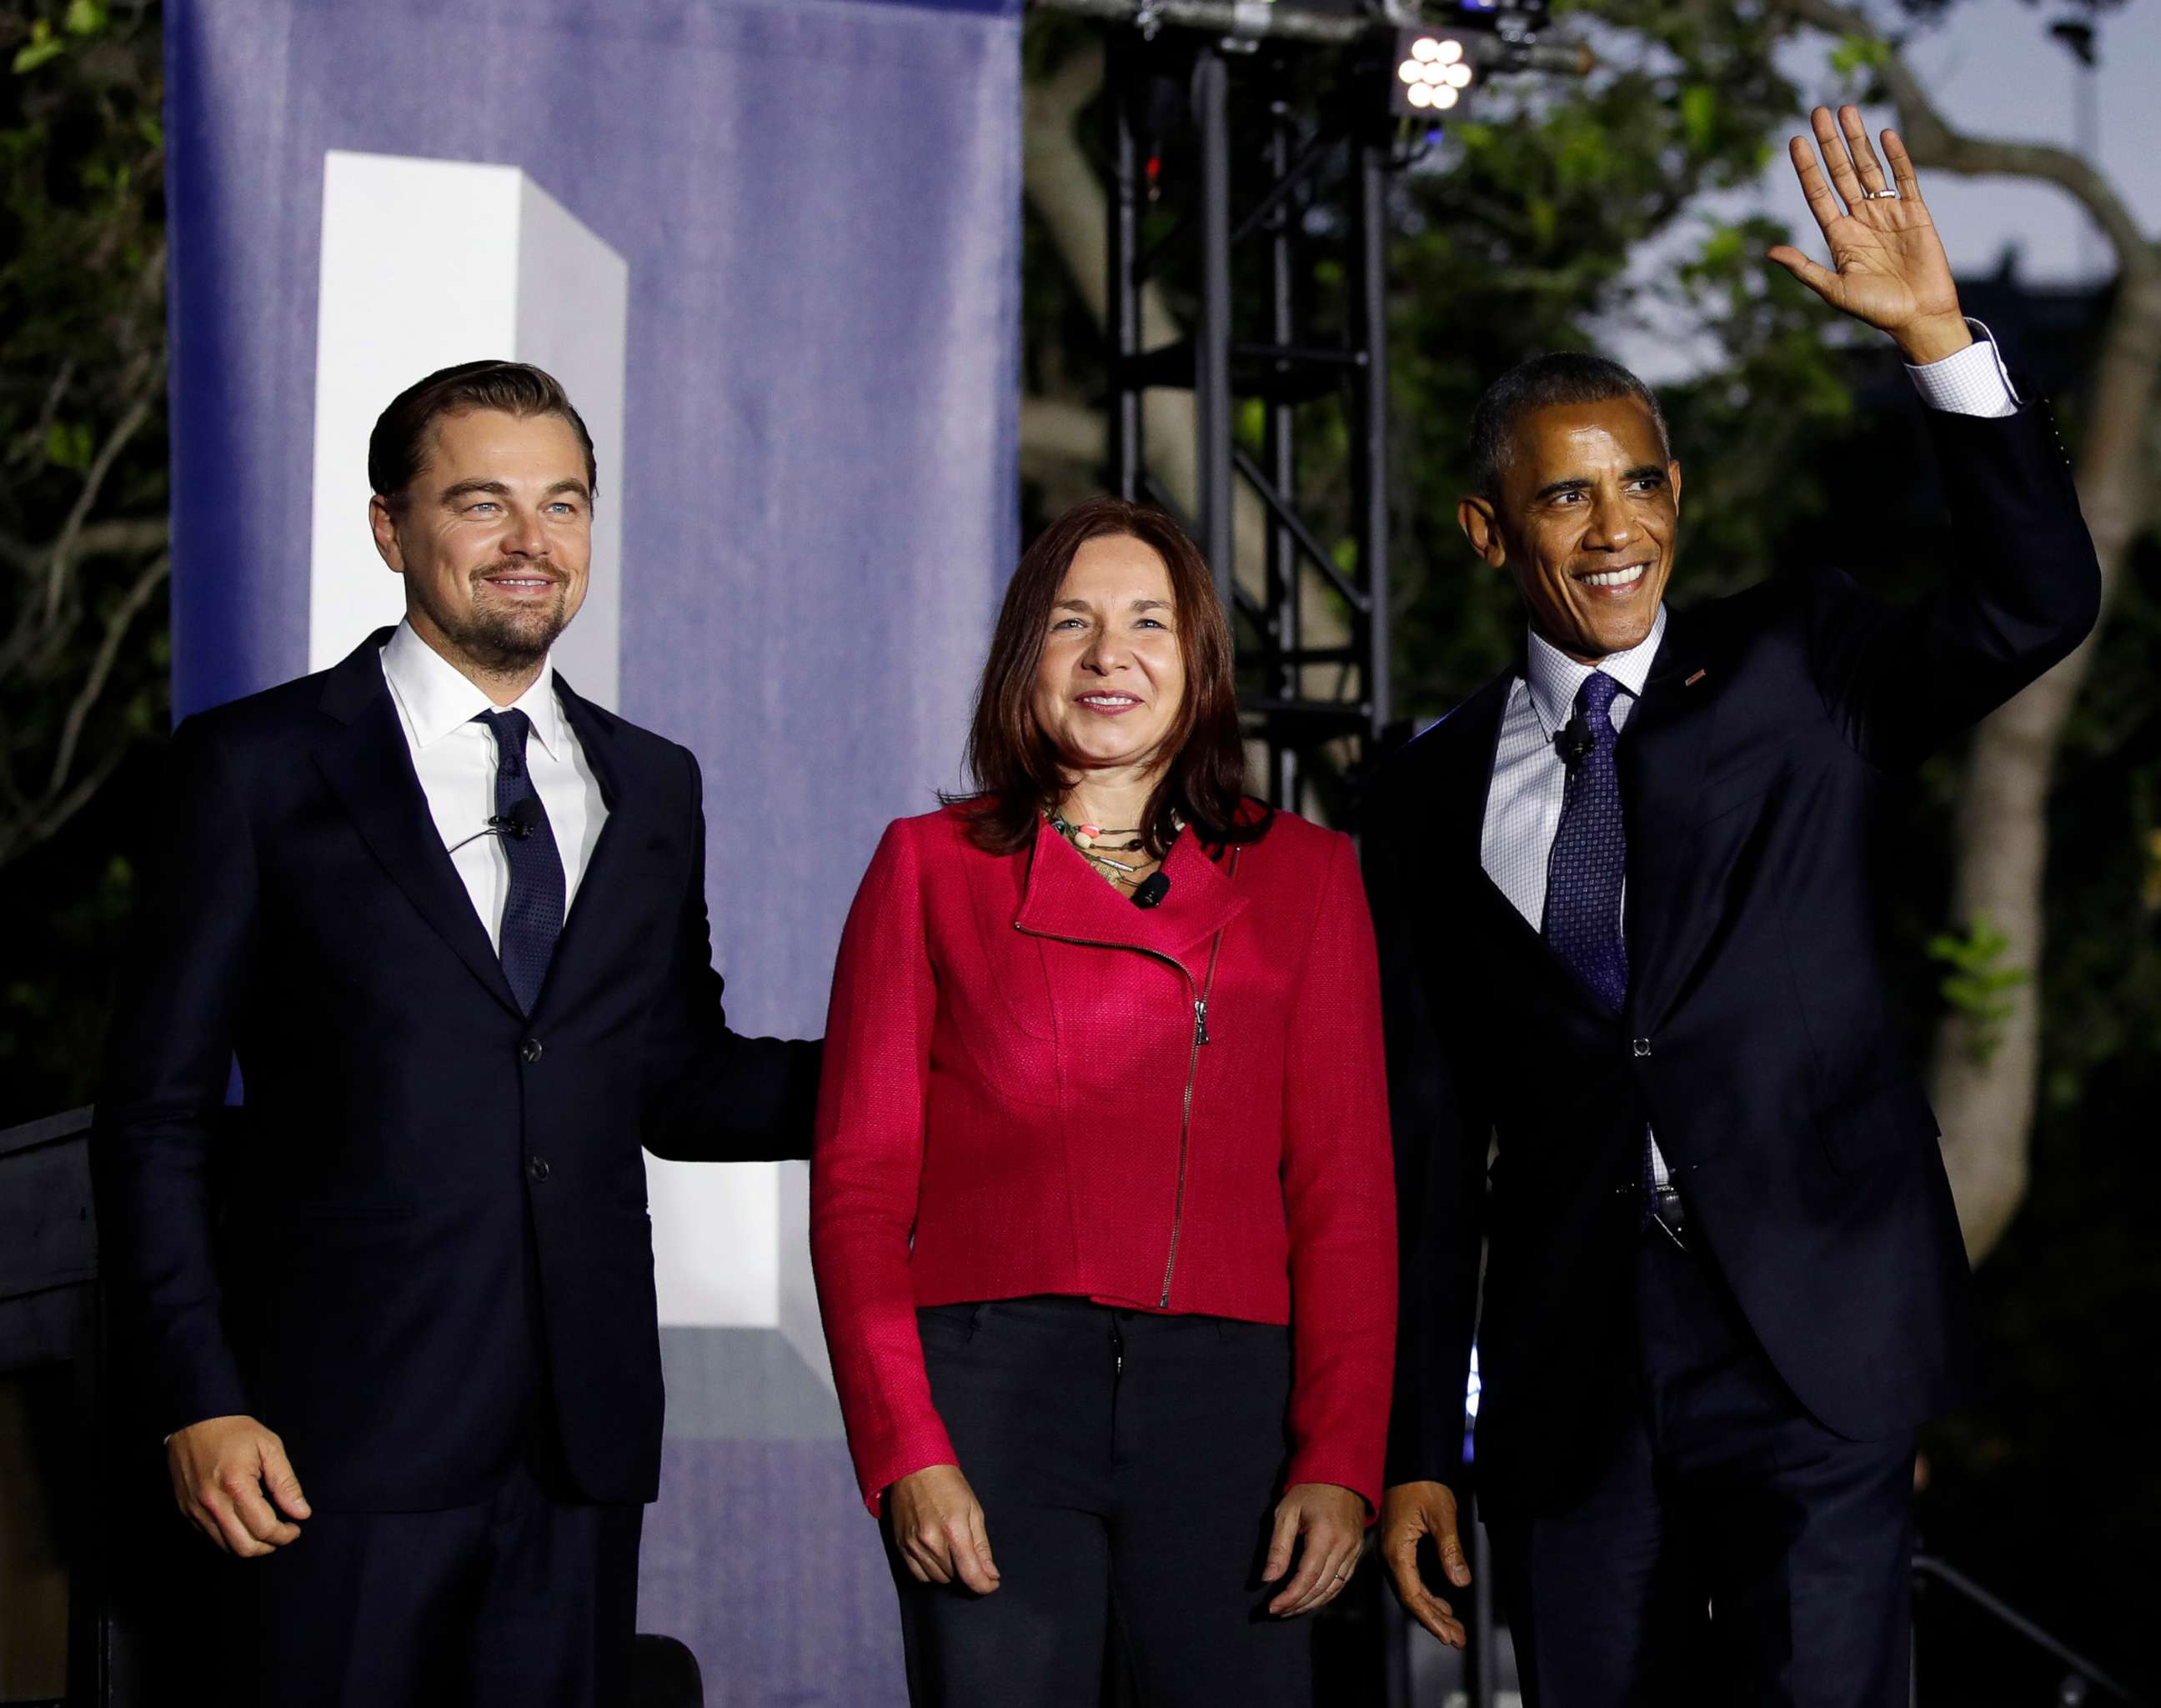 PHOTO: In this Oct. 3, 2016, file photo, President Barack Obama arrives with actor Leonardo DiCaprio and Dr. Katharine Hayhoe to talk about climate change on the South Lawn of the White House in Washington, D.C.